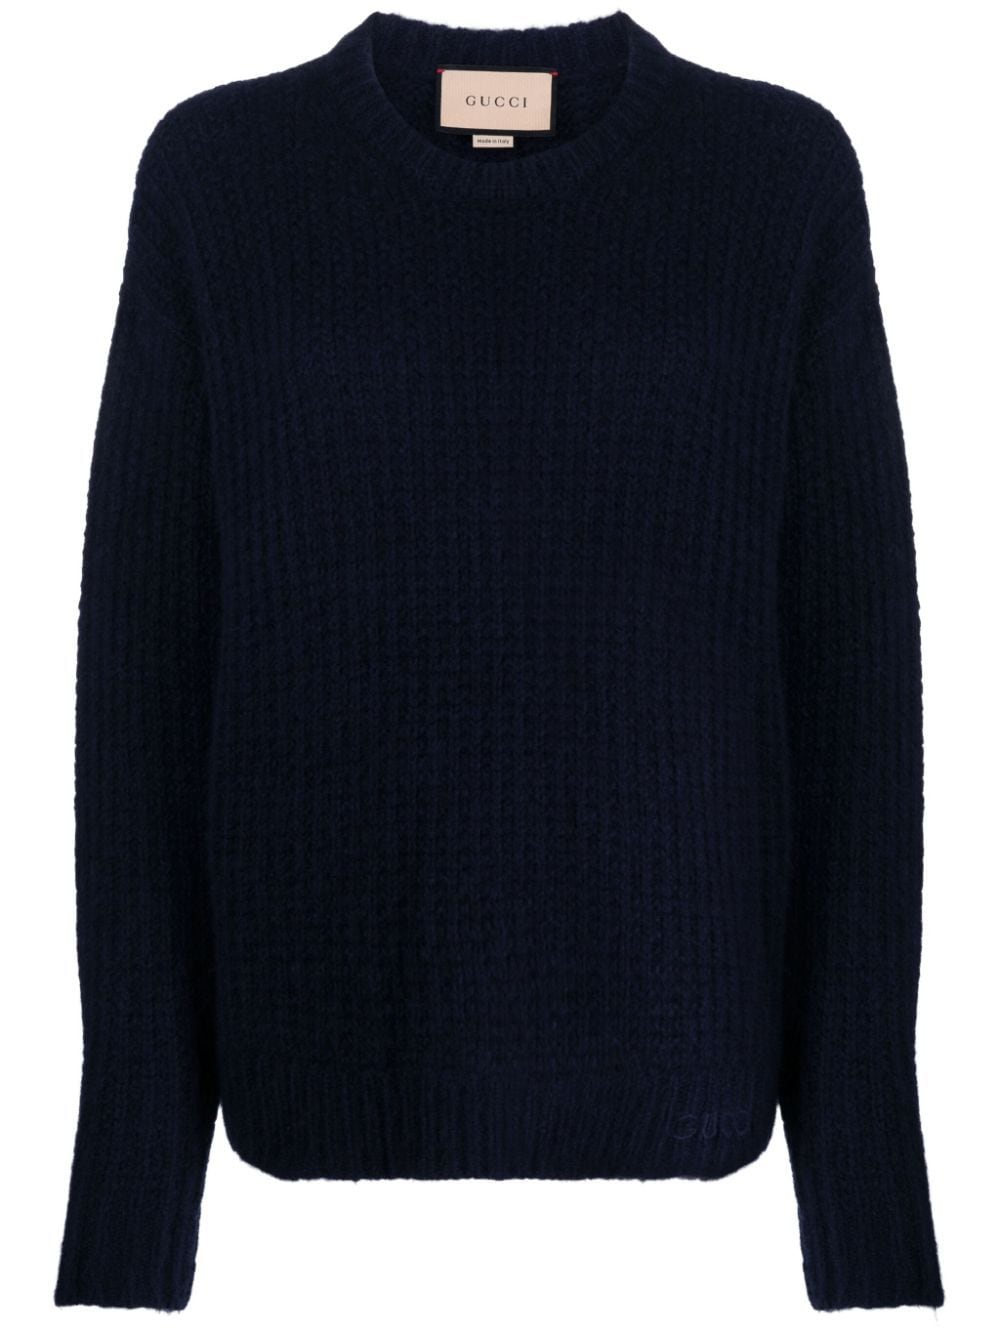 Gucci logo-embroidered knitted cashmere jumper - Blue